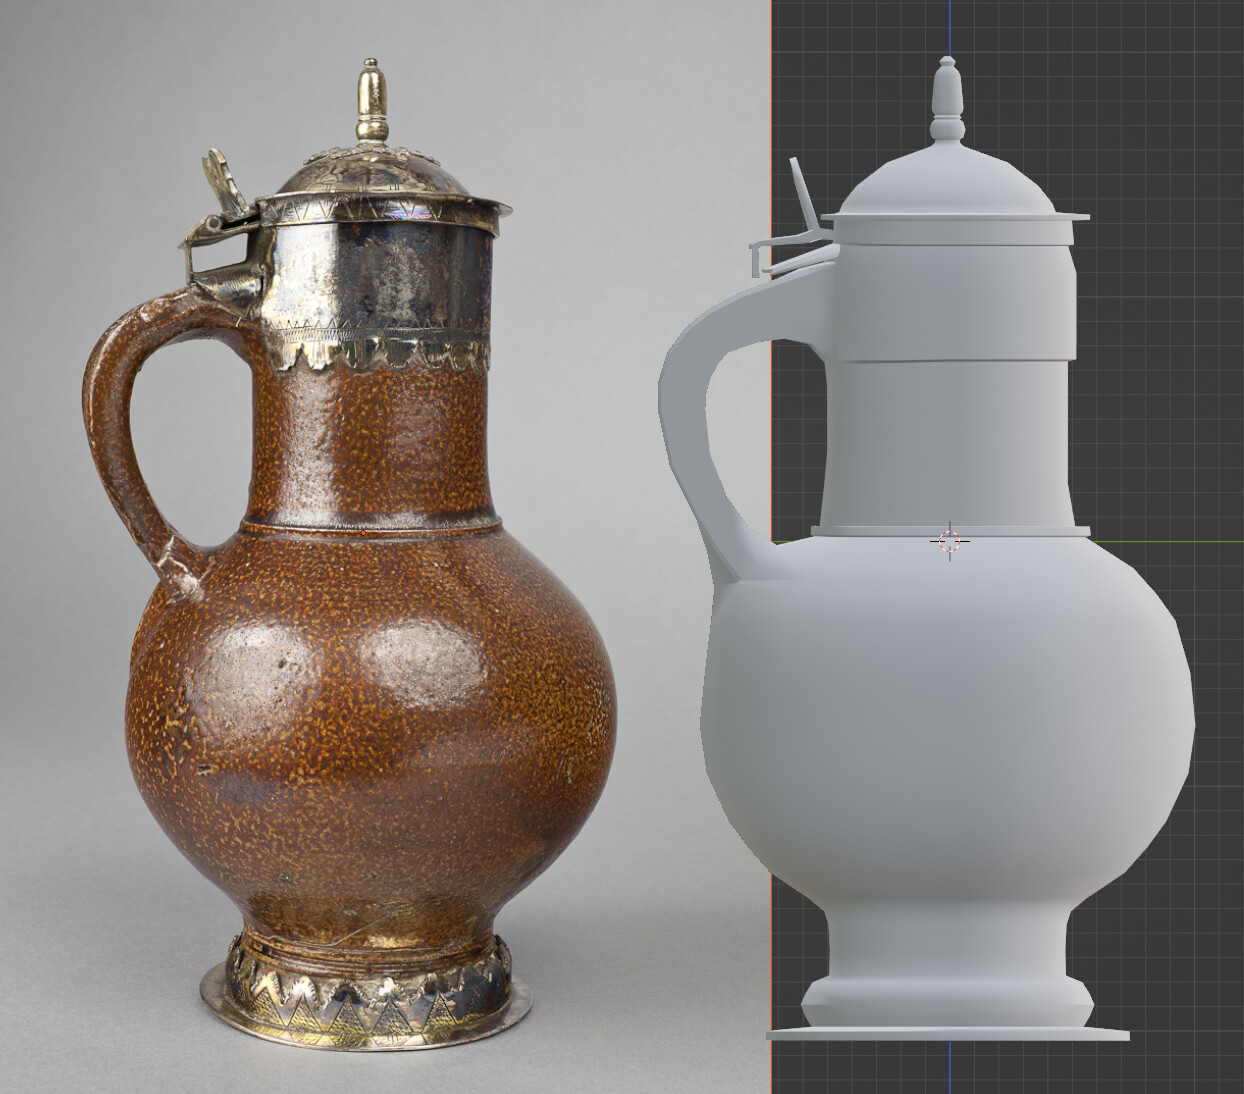 Work in progress screenshot of the lidded jug in Blender with a reference photo next to it.